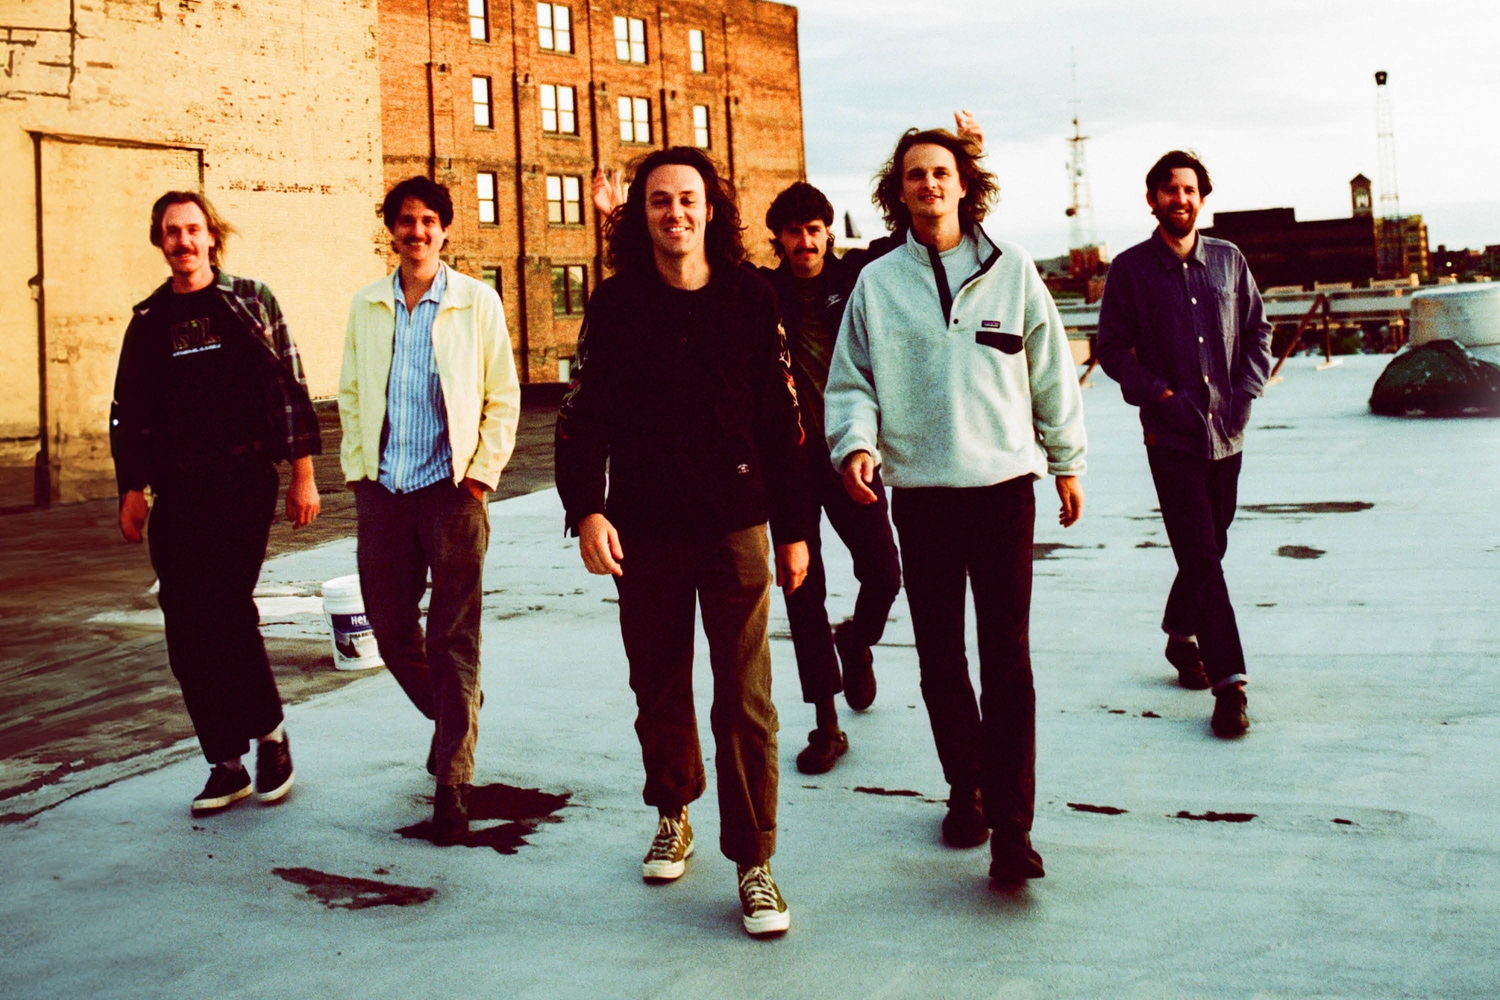 King Gizzard & The Lizard Wizard talk new album 'The Silver Cord' and look back on their huge career